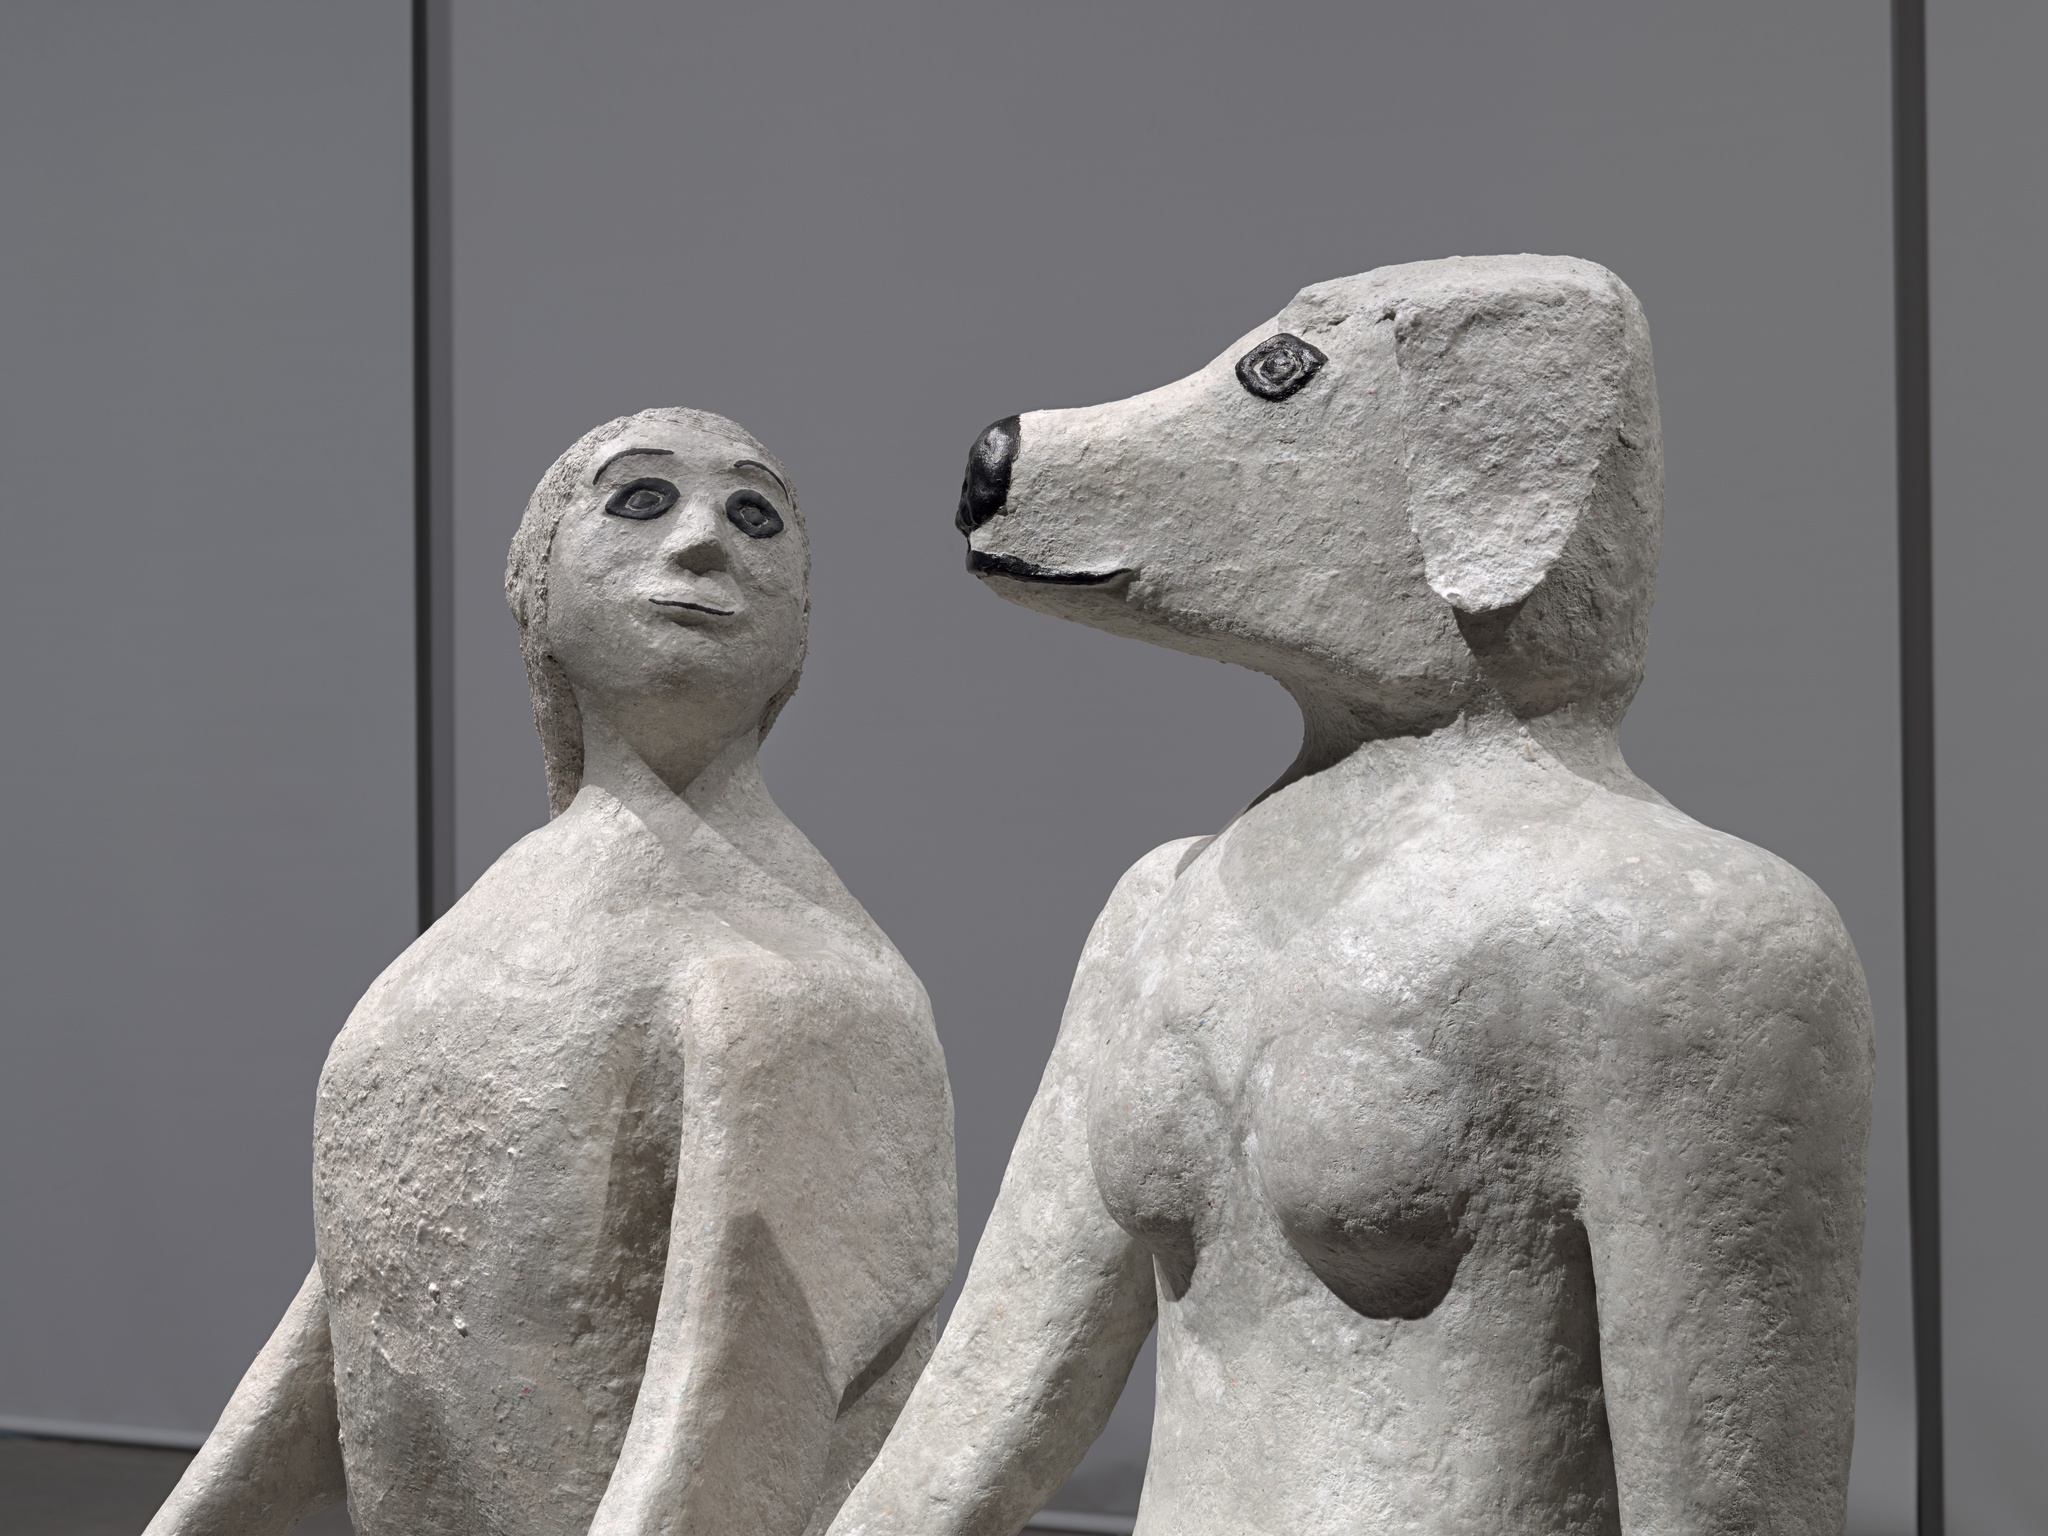 Two sculptures of anthropomorphic figures seen from the shoulders up. One has the head of a woman and the other the head of a dog.